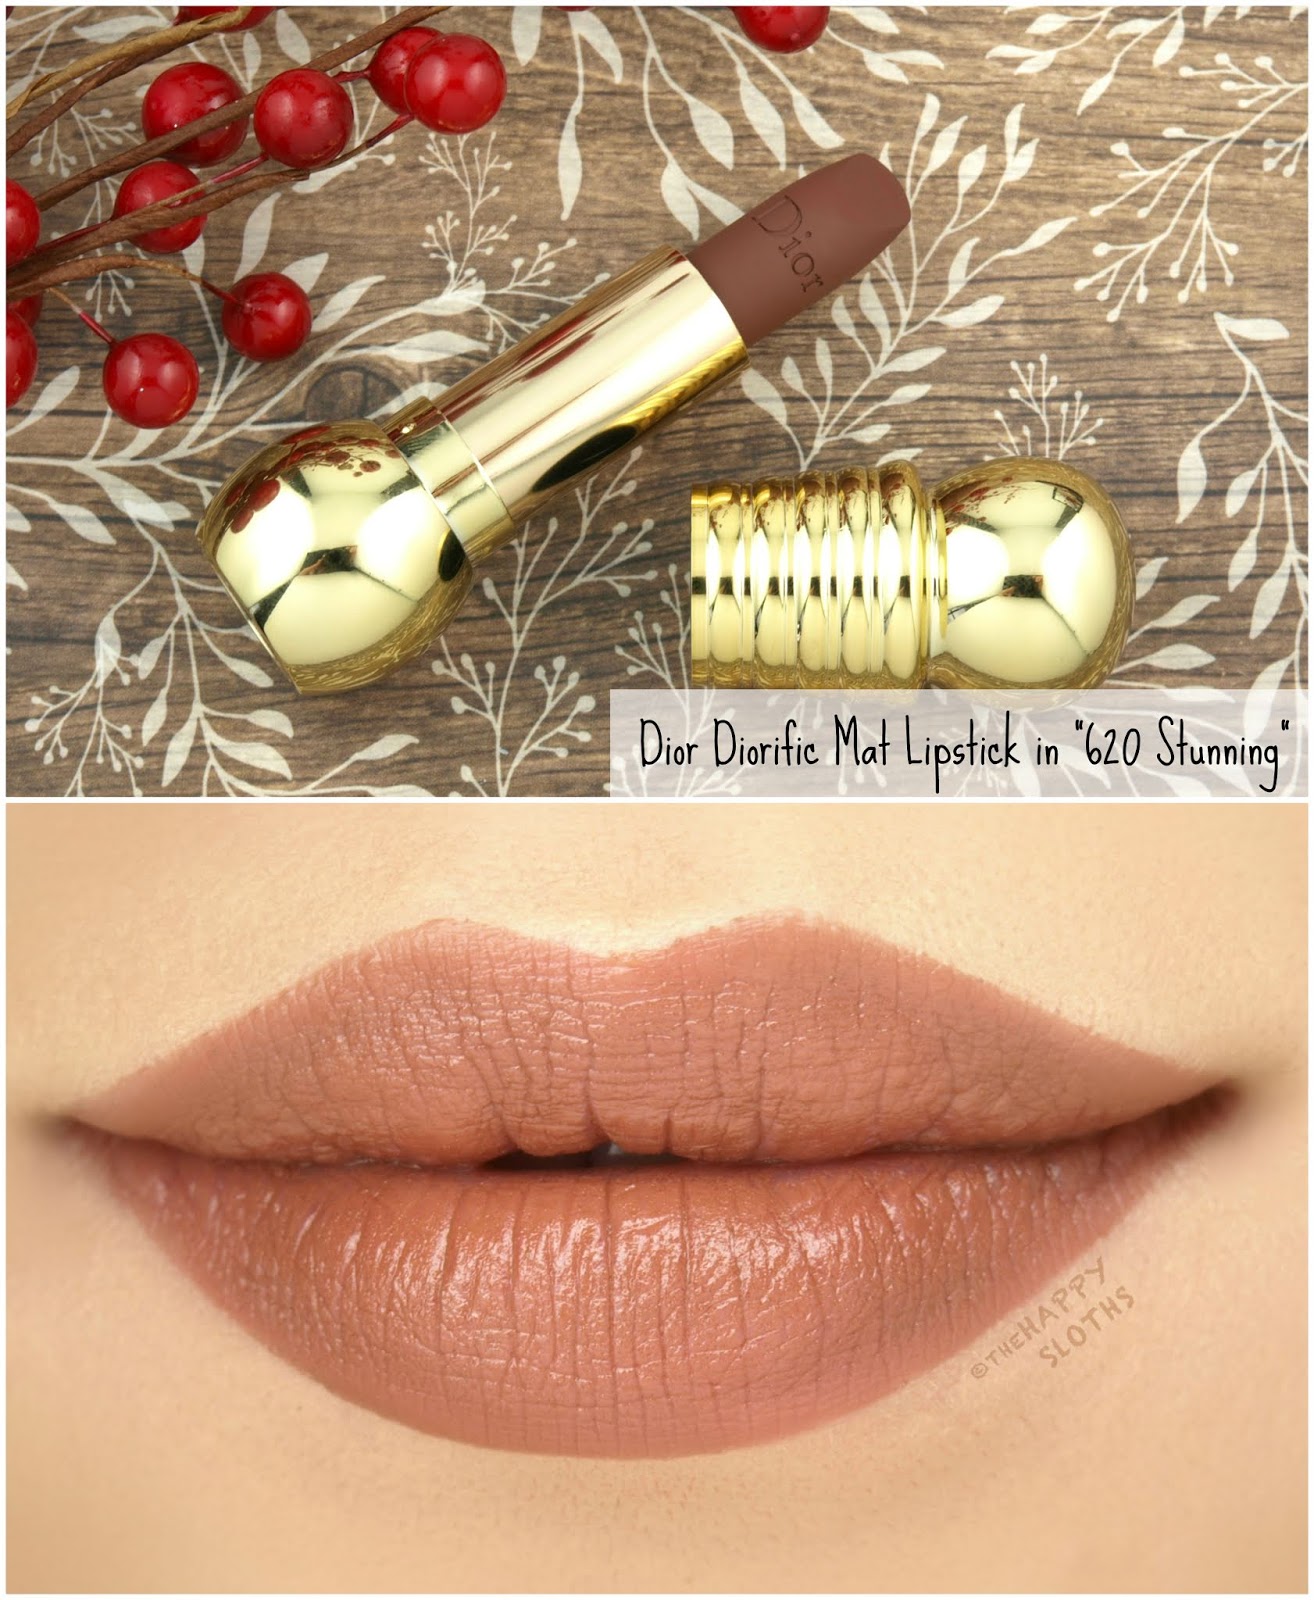 Dior | Holiday 2018 Diorific Mat Lipstick in "620 Stunning": Review and Swatches